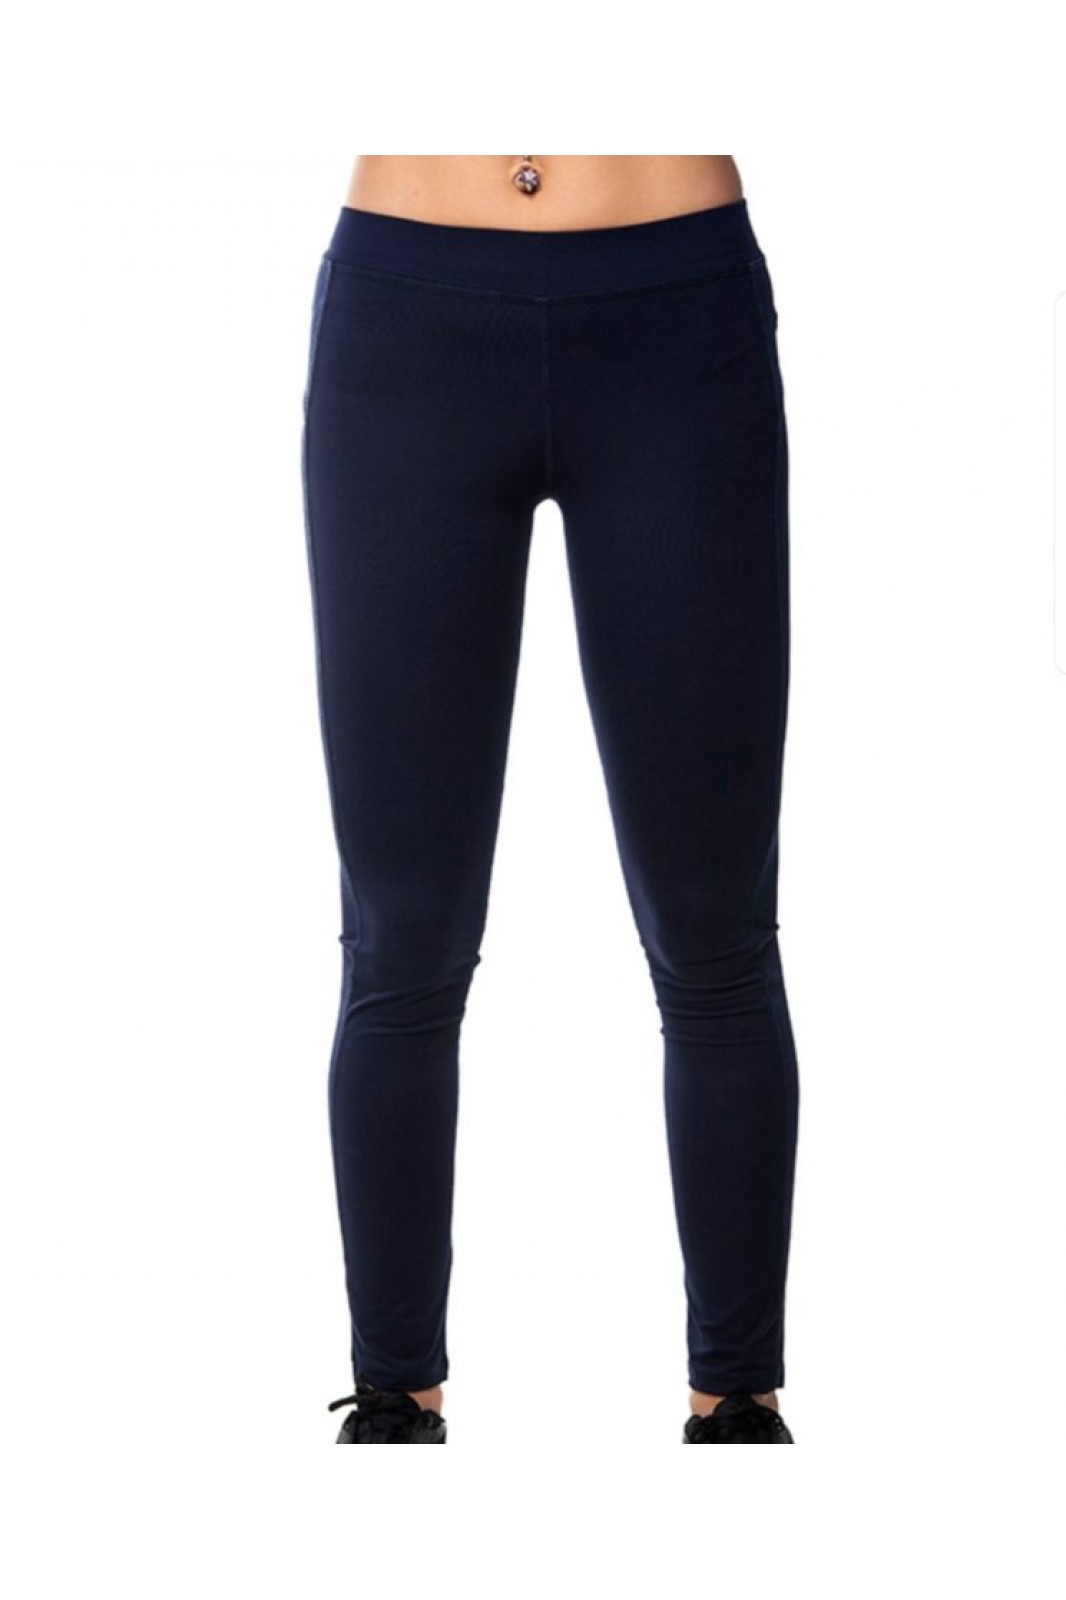 BODY MOVE leggings DRY-FIT with belt